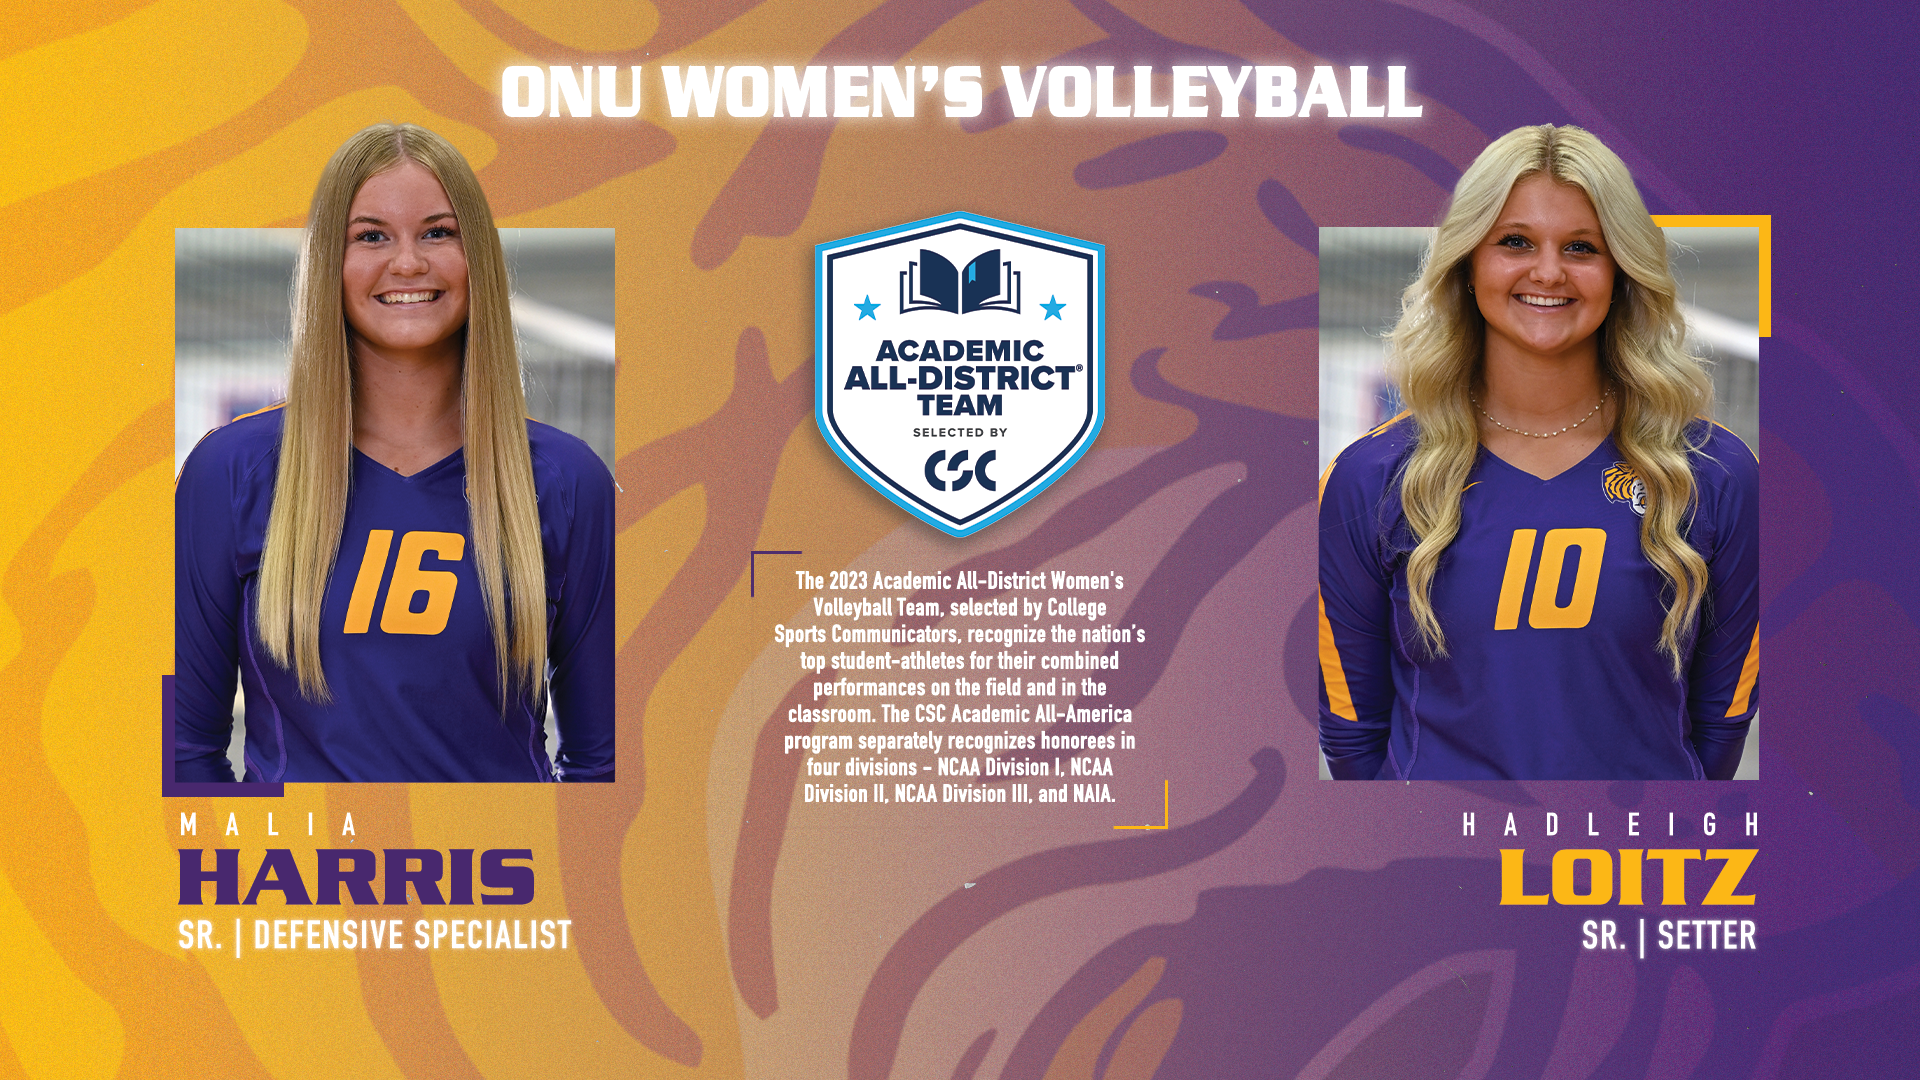 HARRIS, LOITZ NAMED TO CSC ACADEMIC ALL-DISTRICT TEAM